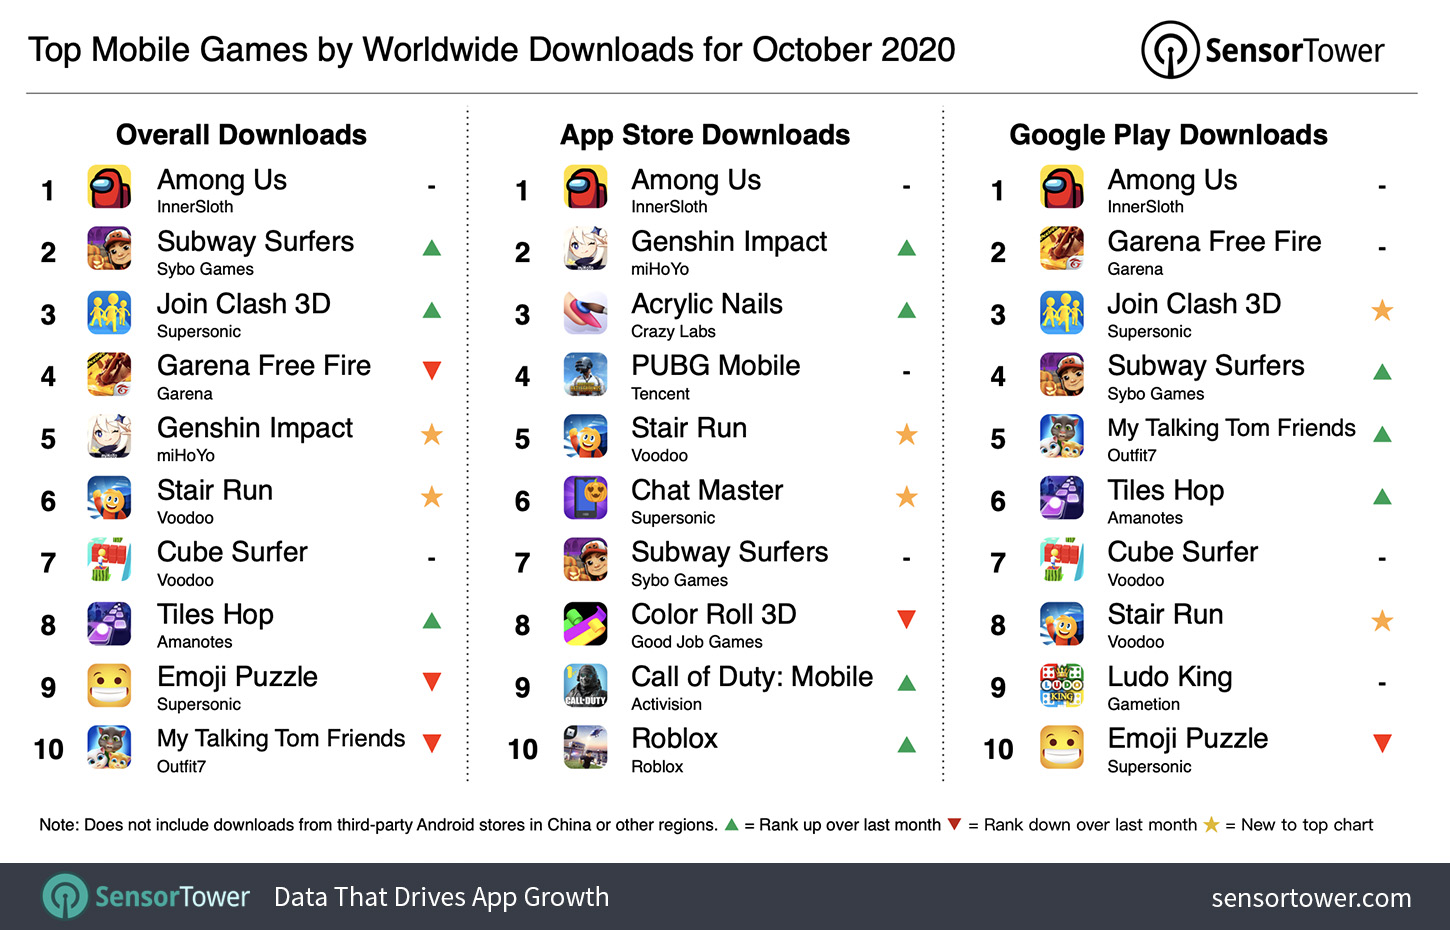 Top Mobile Games Worldwide for October 2020 by Downloads